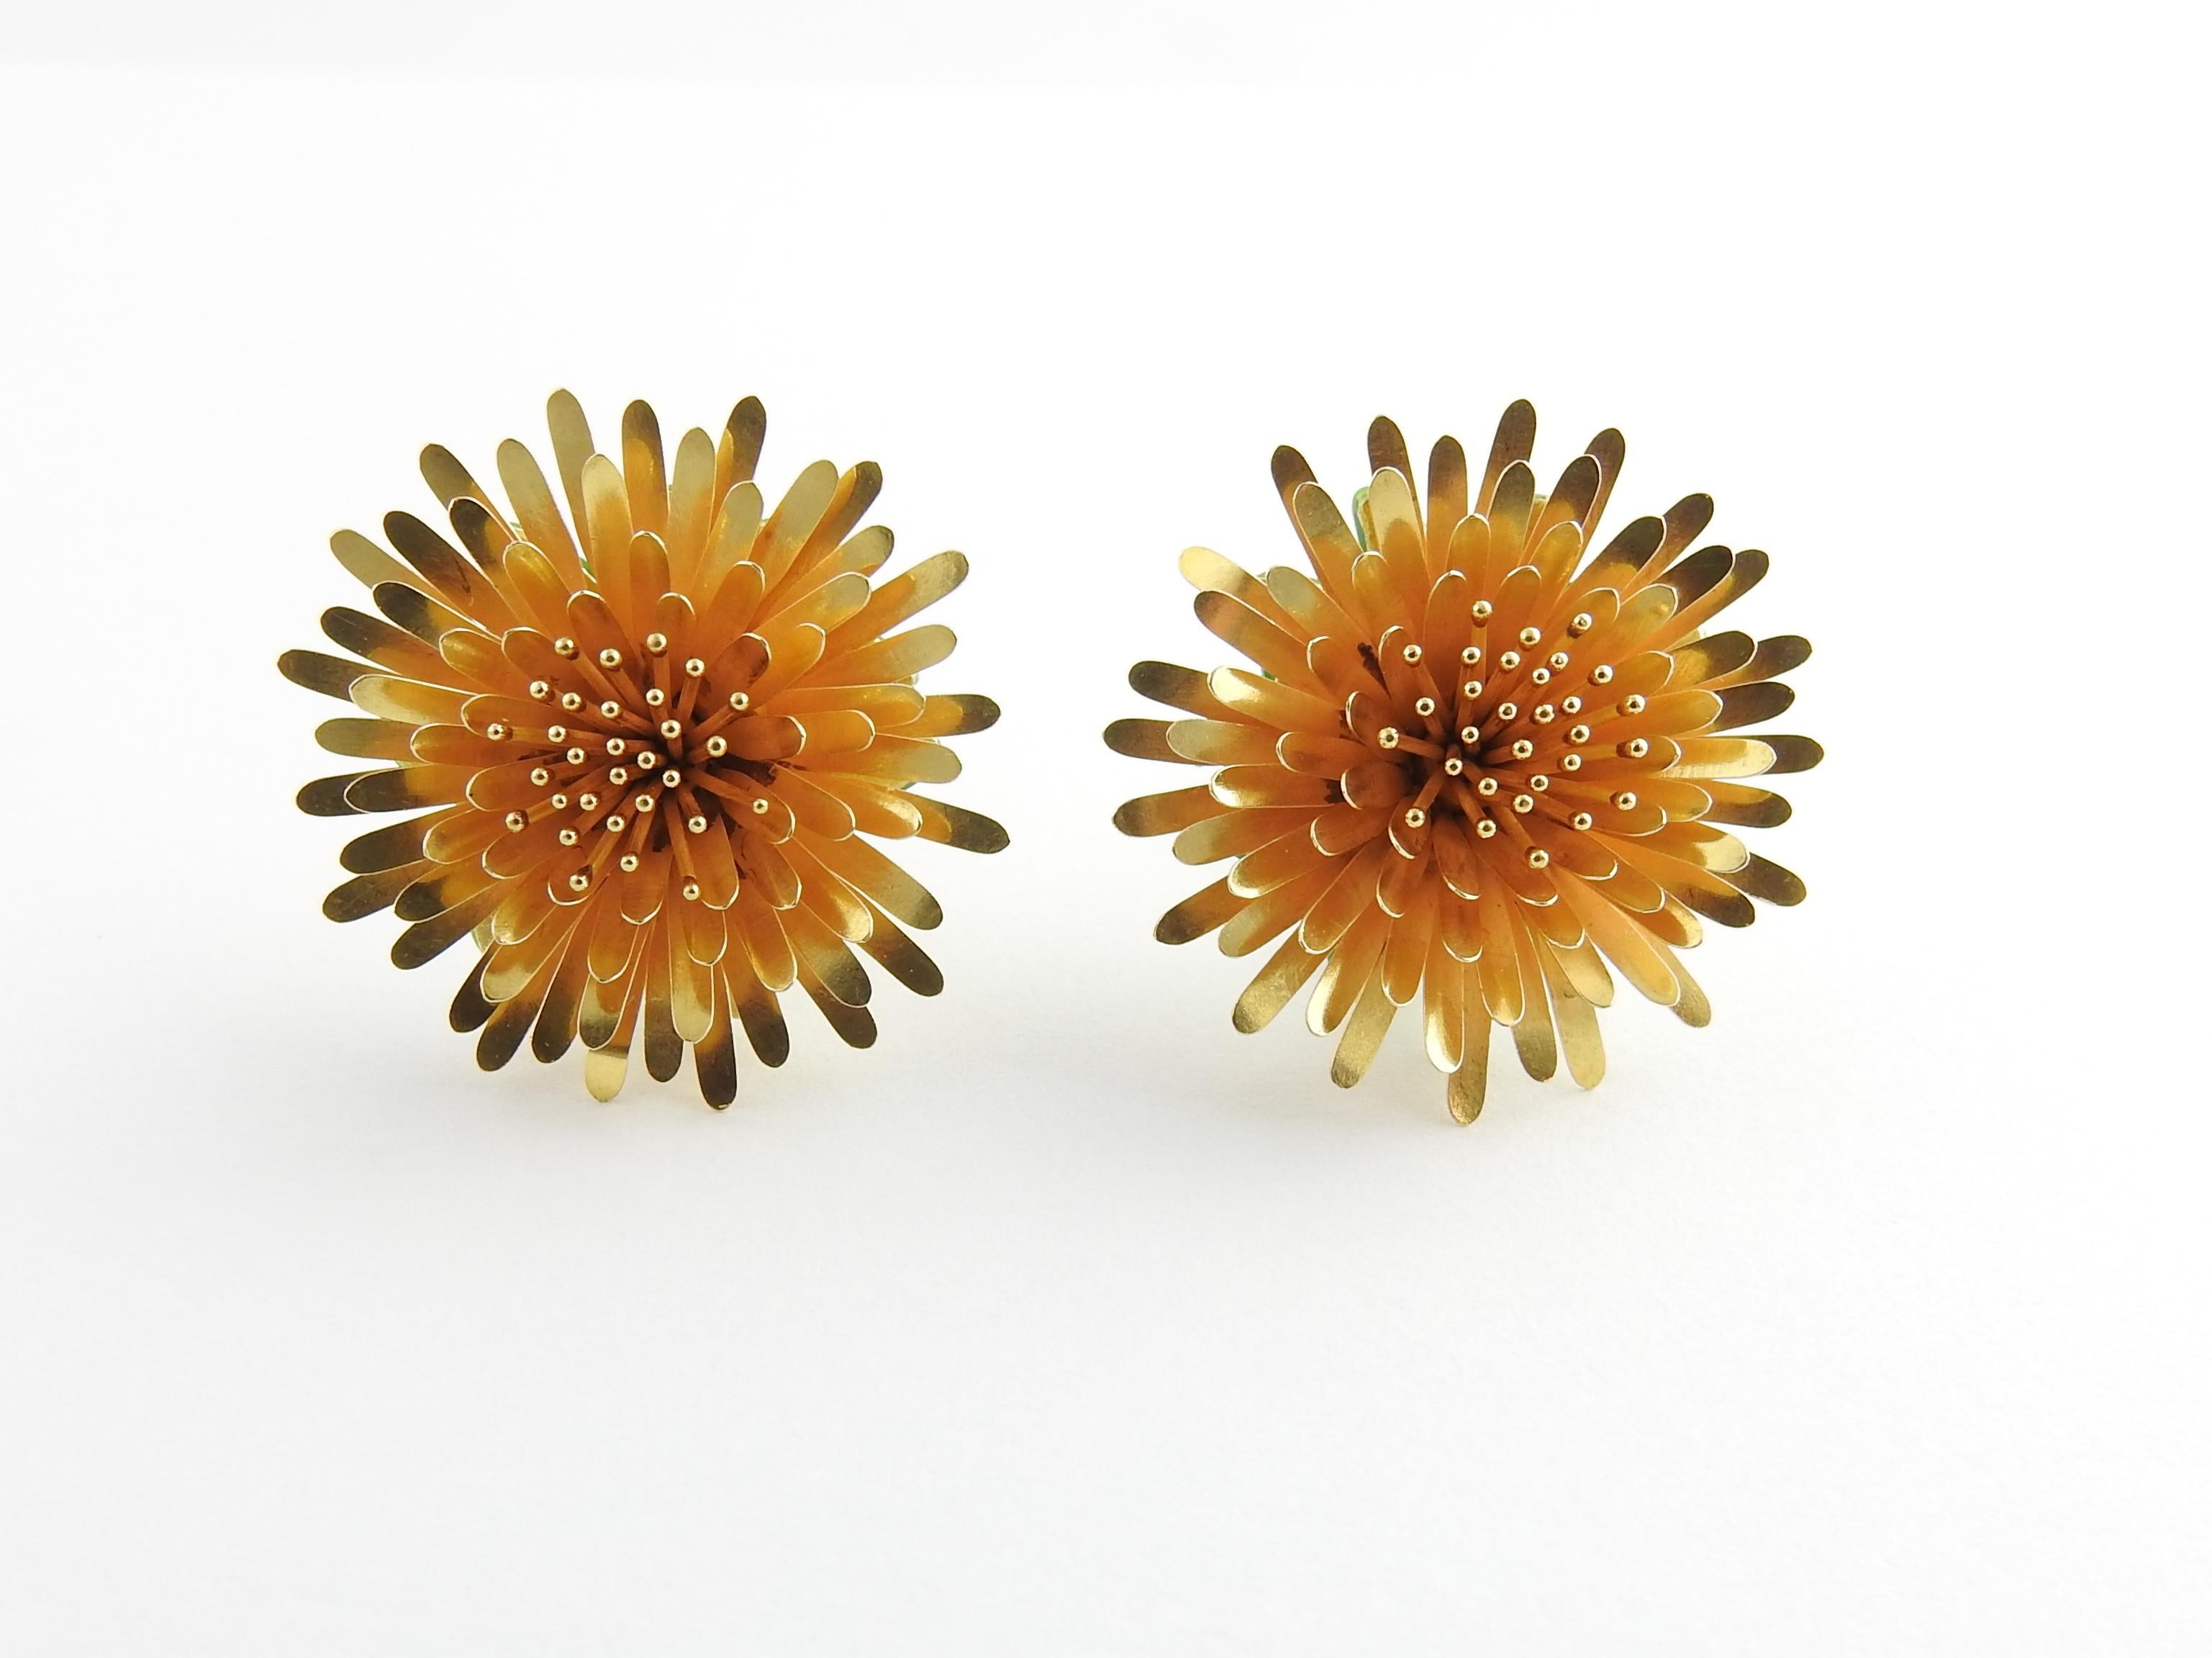 McTeigue & McClelland 18K Yellow Gold Dandelion Earrings

These vintage earrings are approx. 25mm in diameter  McII Medium size  and 10mm thick

Stamped 750 McII

16.3 g / 10.5 dwt

Omega backs - clip on earrings

The back has a green enamel foliate